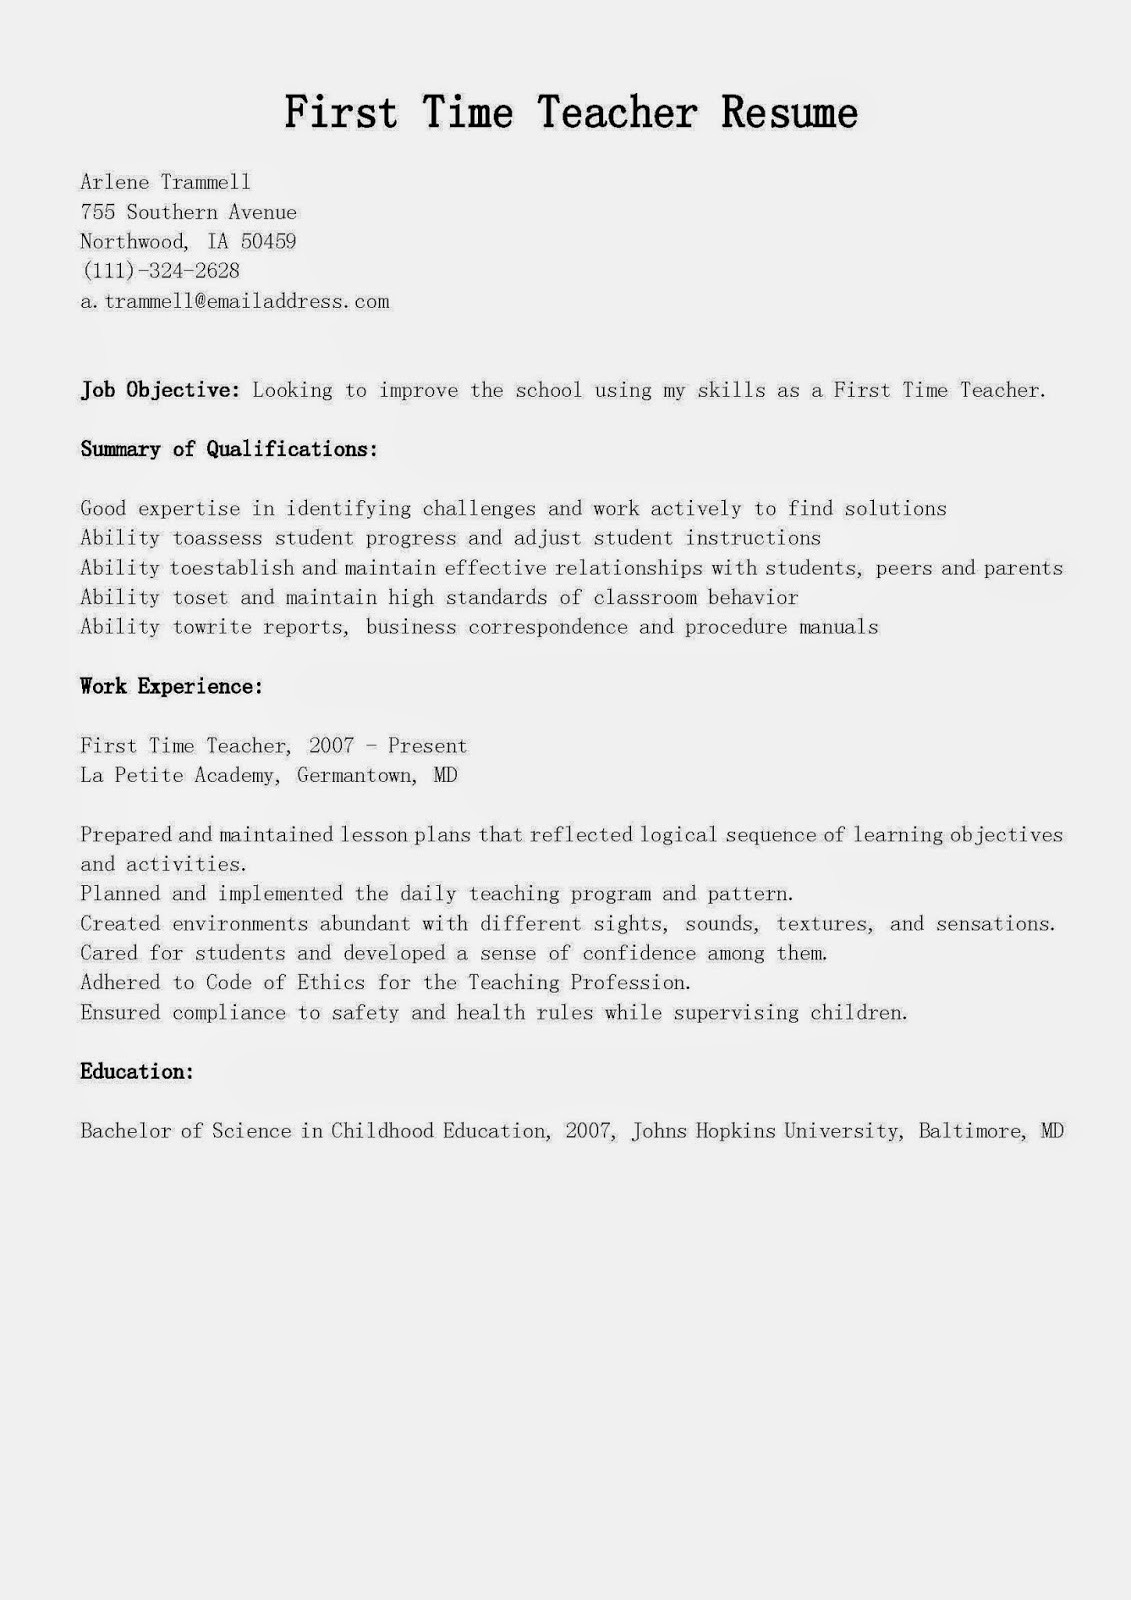 First Time Job Resume Best Of Resume Samples First Time Teacher Resume Sample